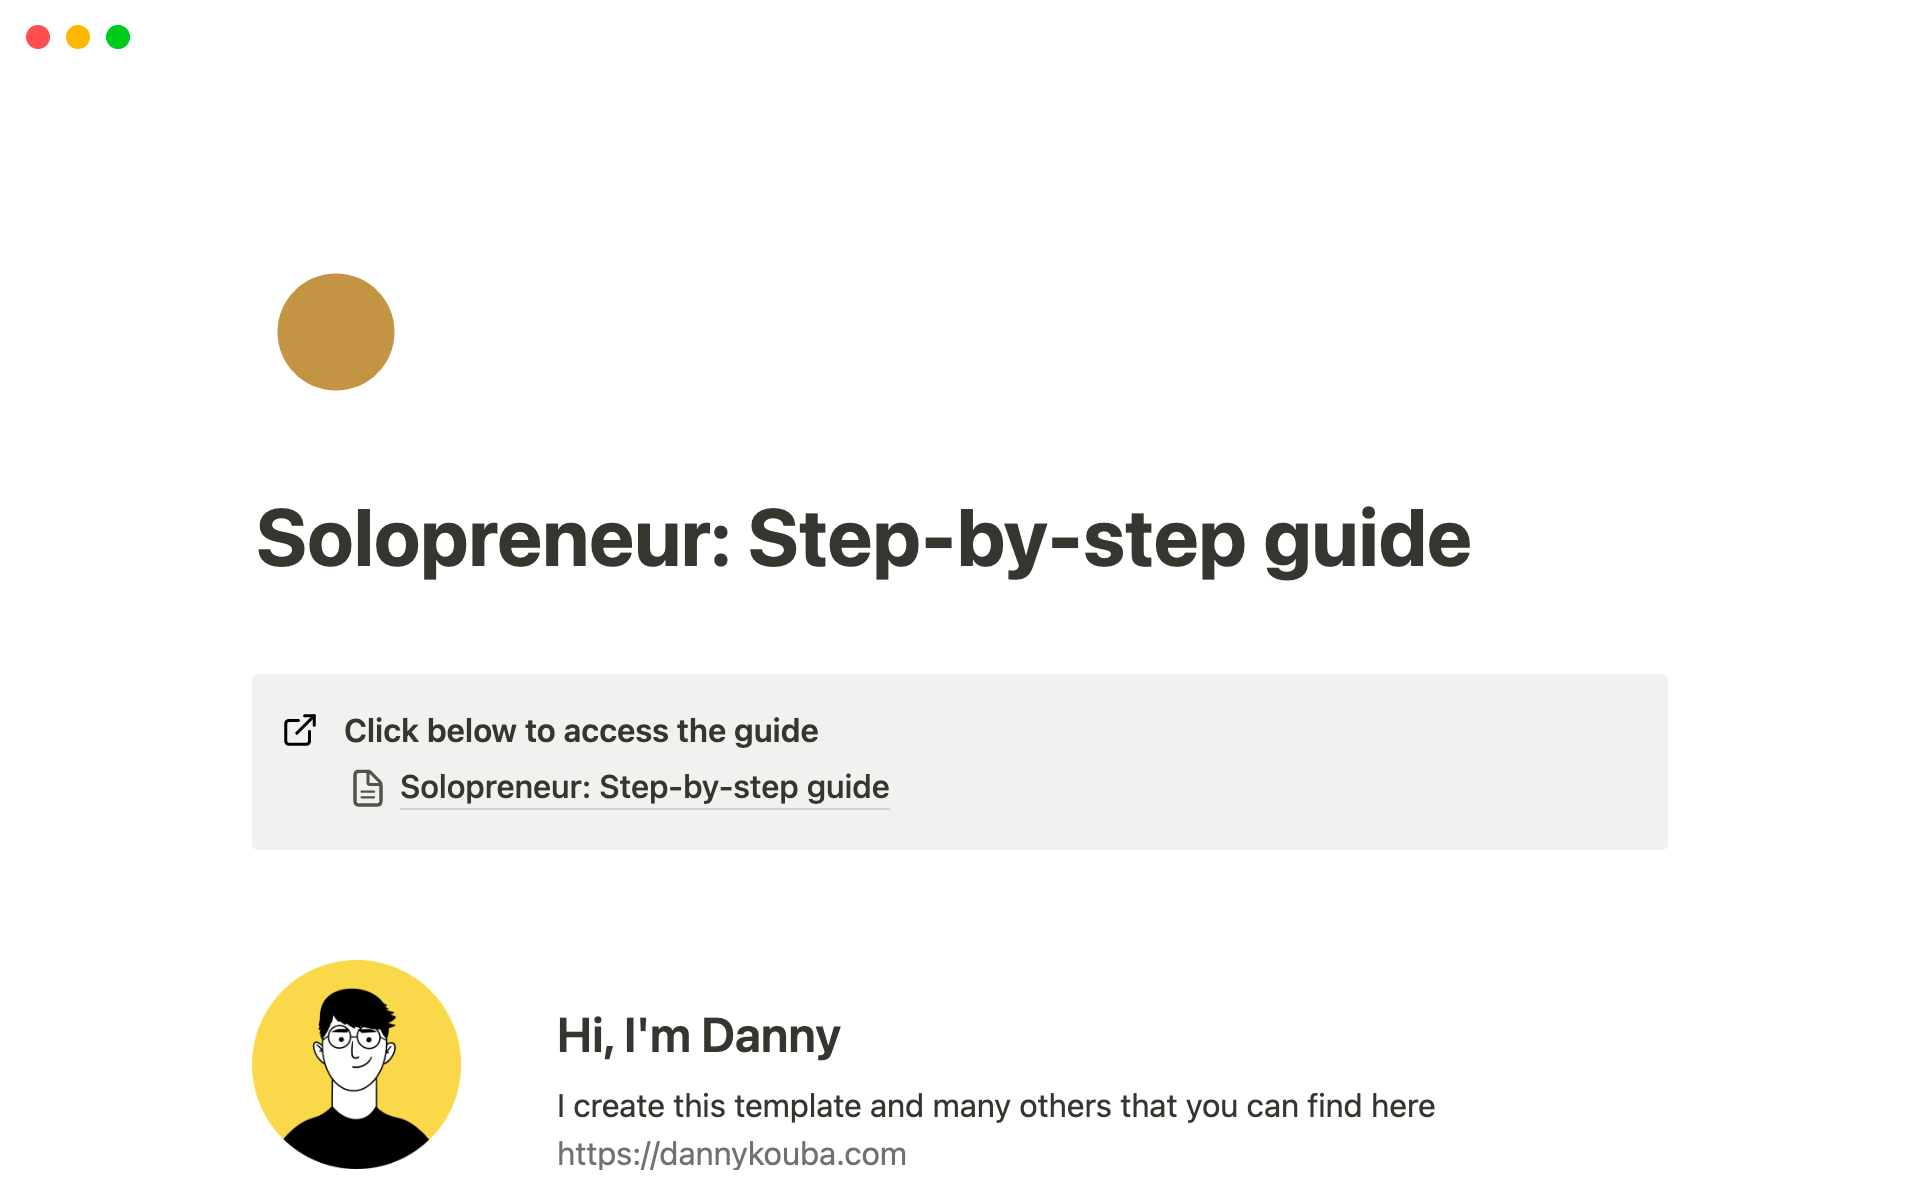 Step-by-step guide on how to become a successful solopreneur